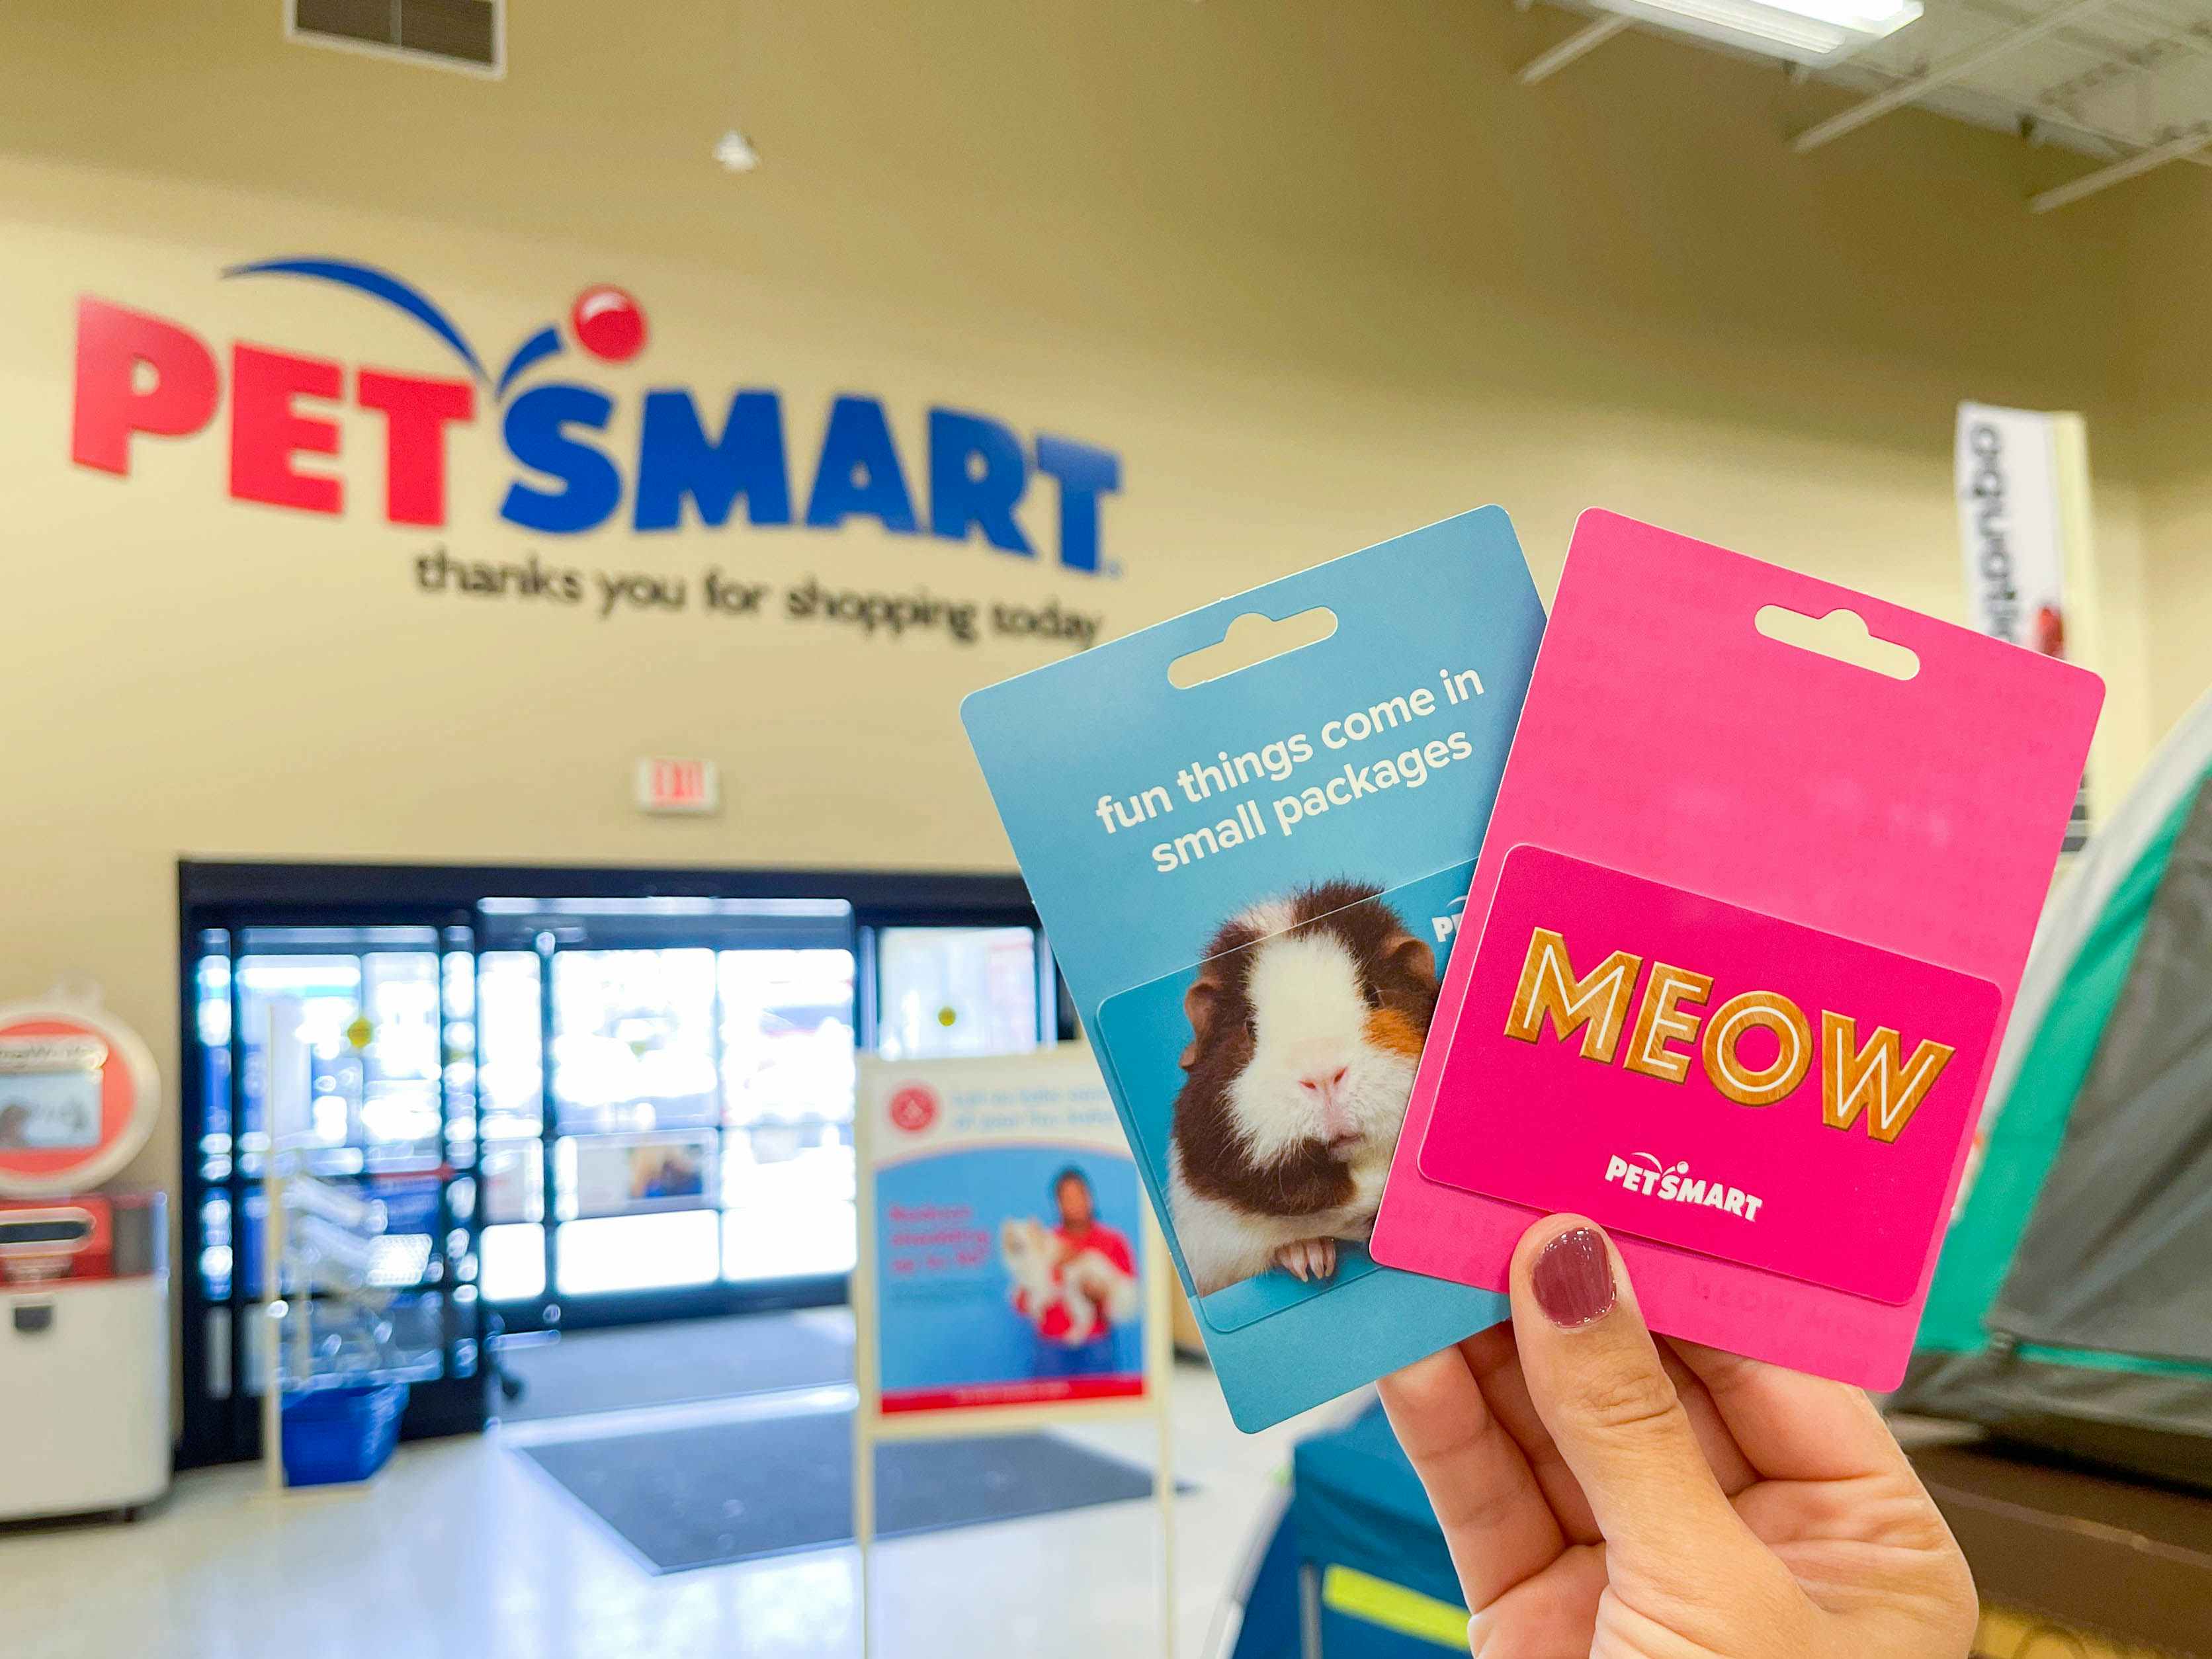 Two PetSmart gift cards being held up inside a PetSmart store, just inside the front door, with the PetSmart logo on the wall in the background.